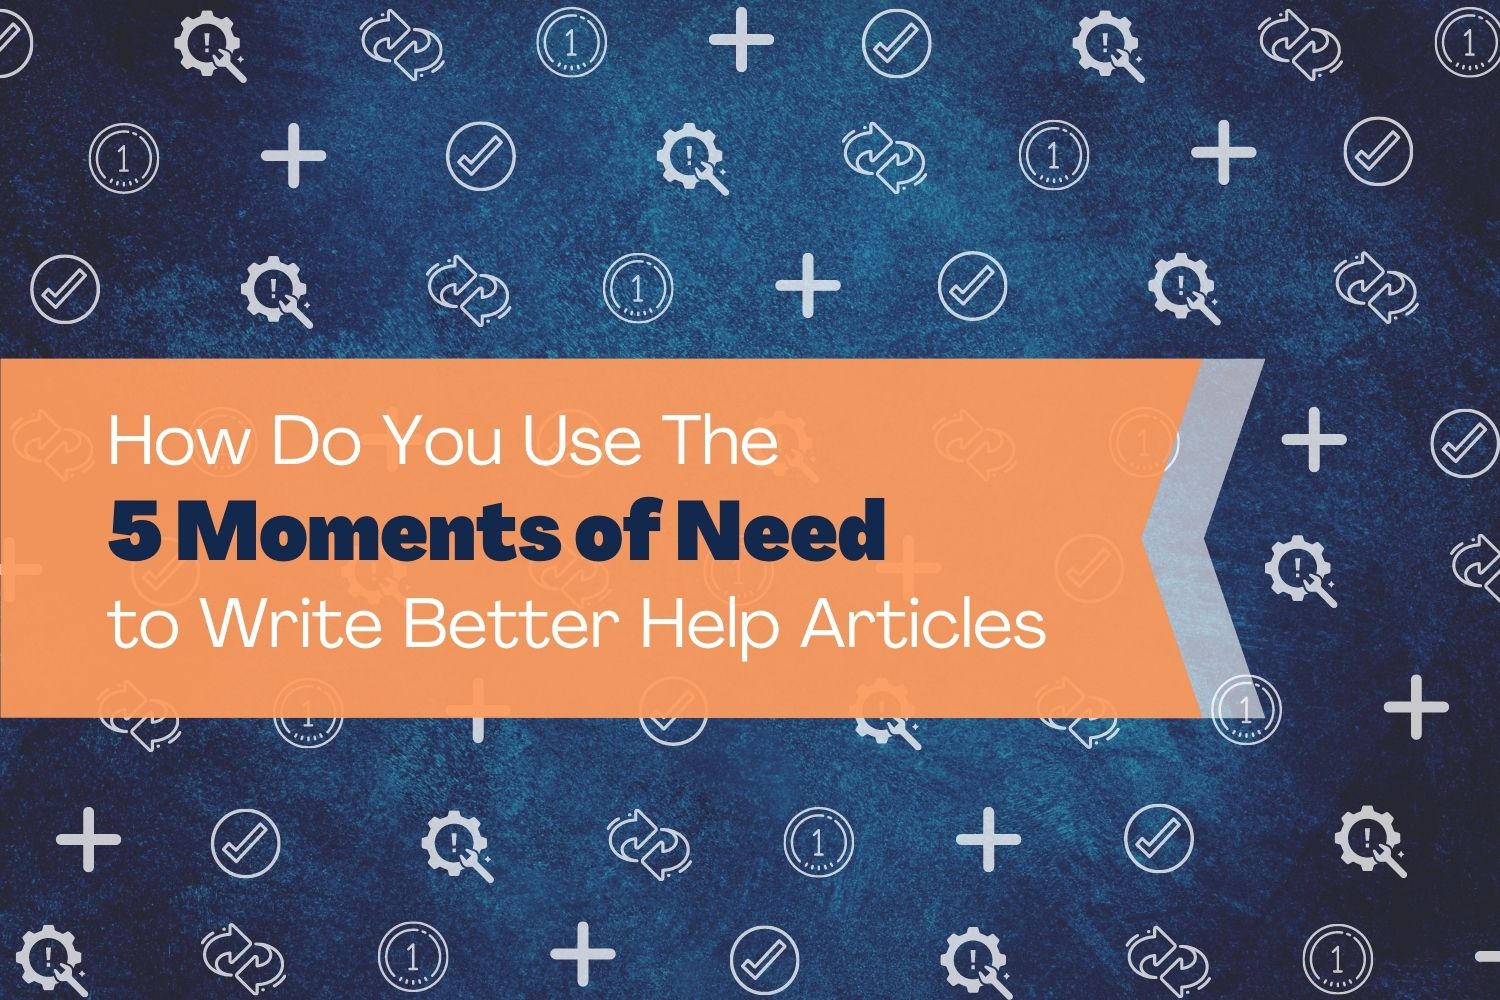 How Do You Use The 5 Moments of Need to Write Better Help Articles